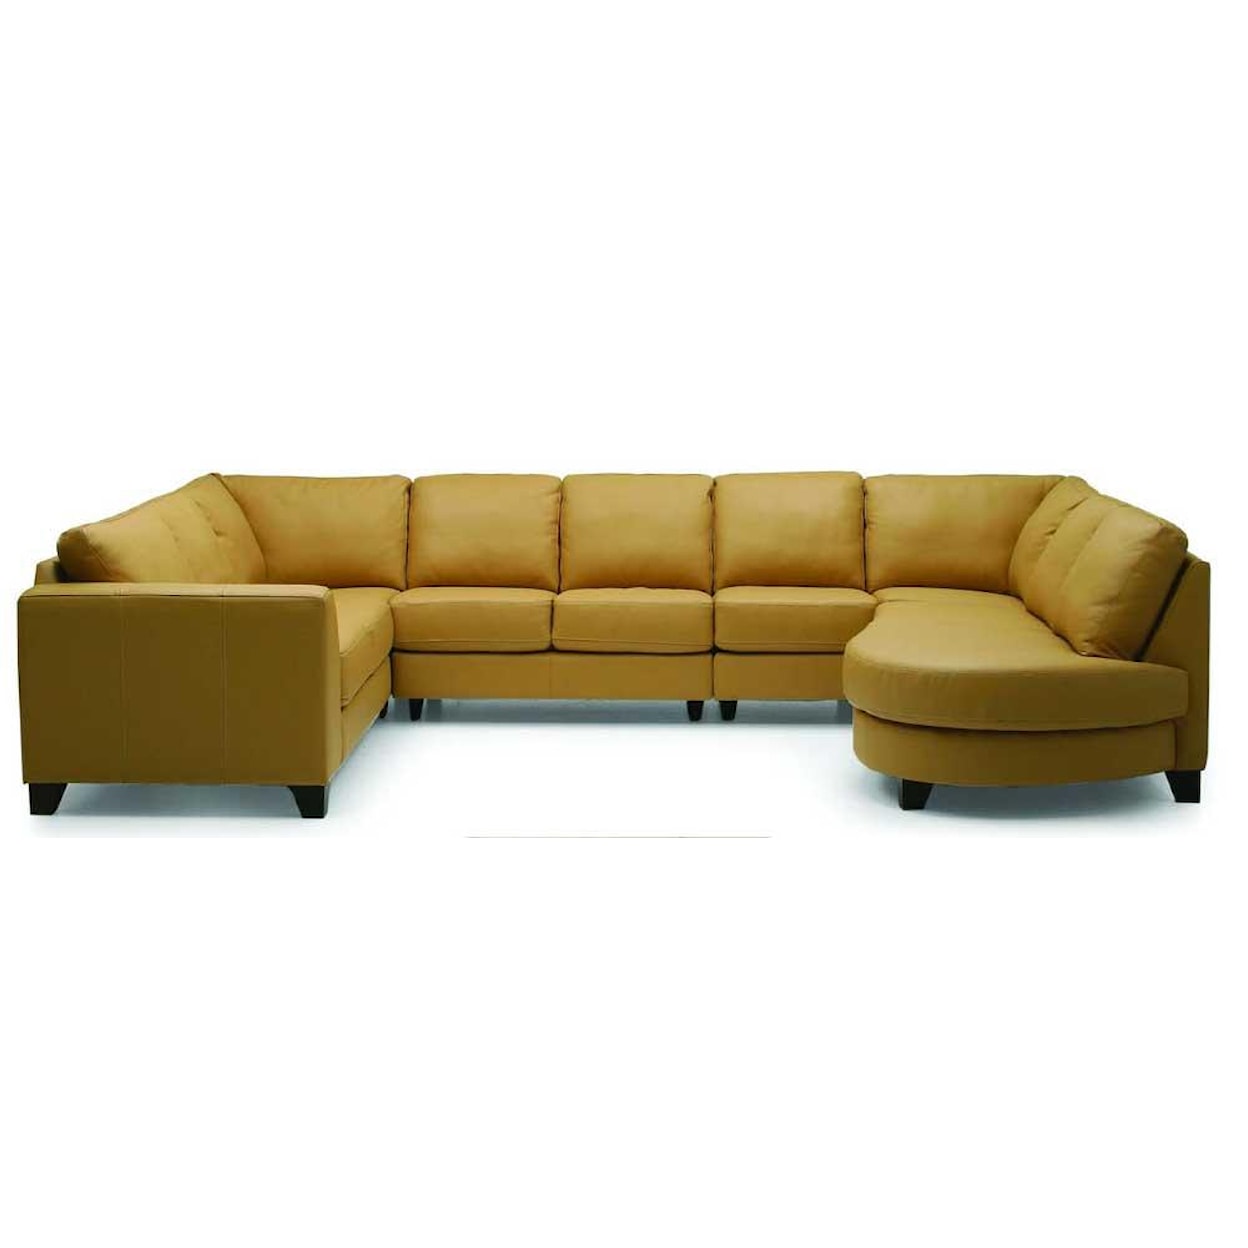 Palliser Juno Elements Chaise and Sofa Sectional